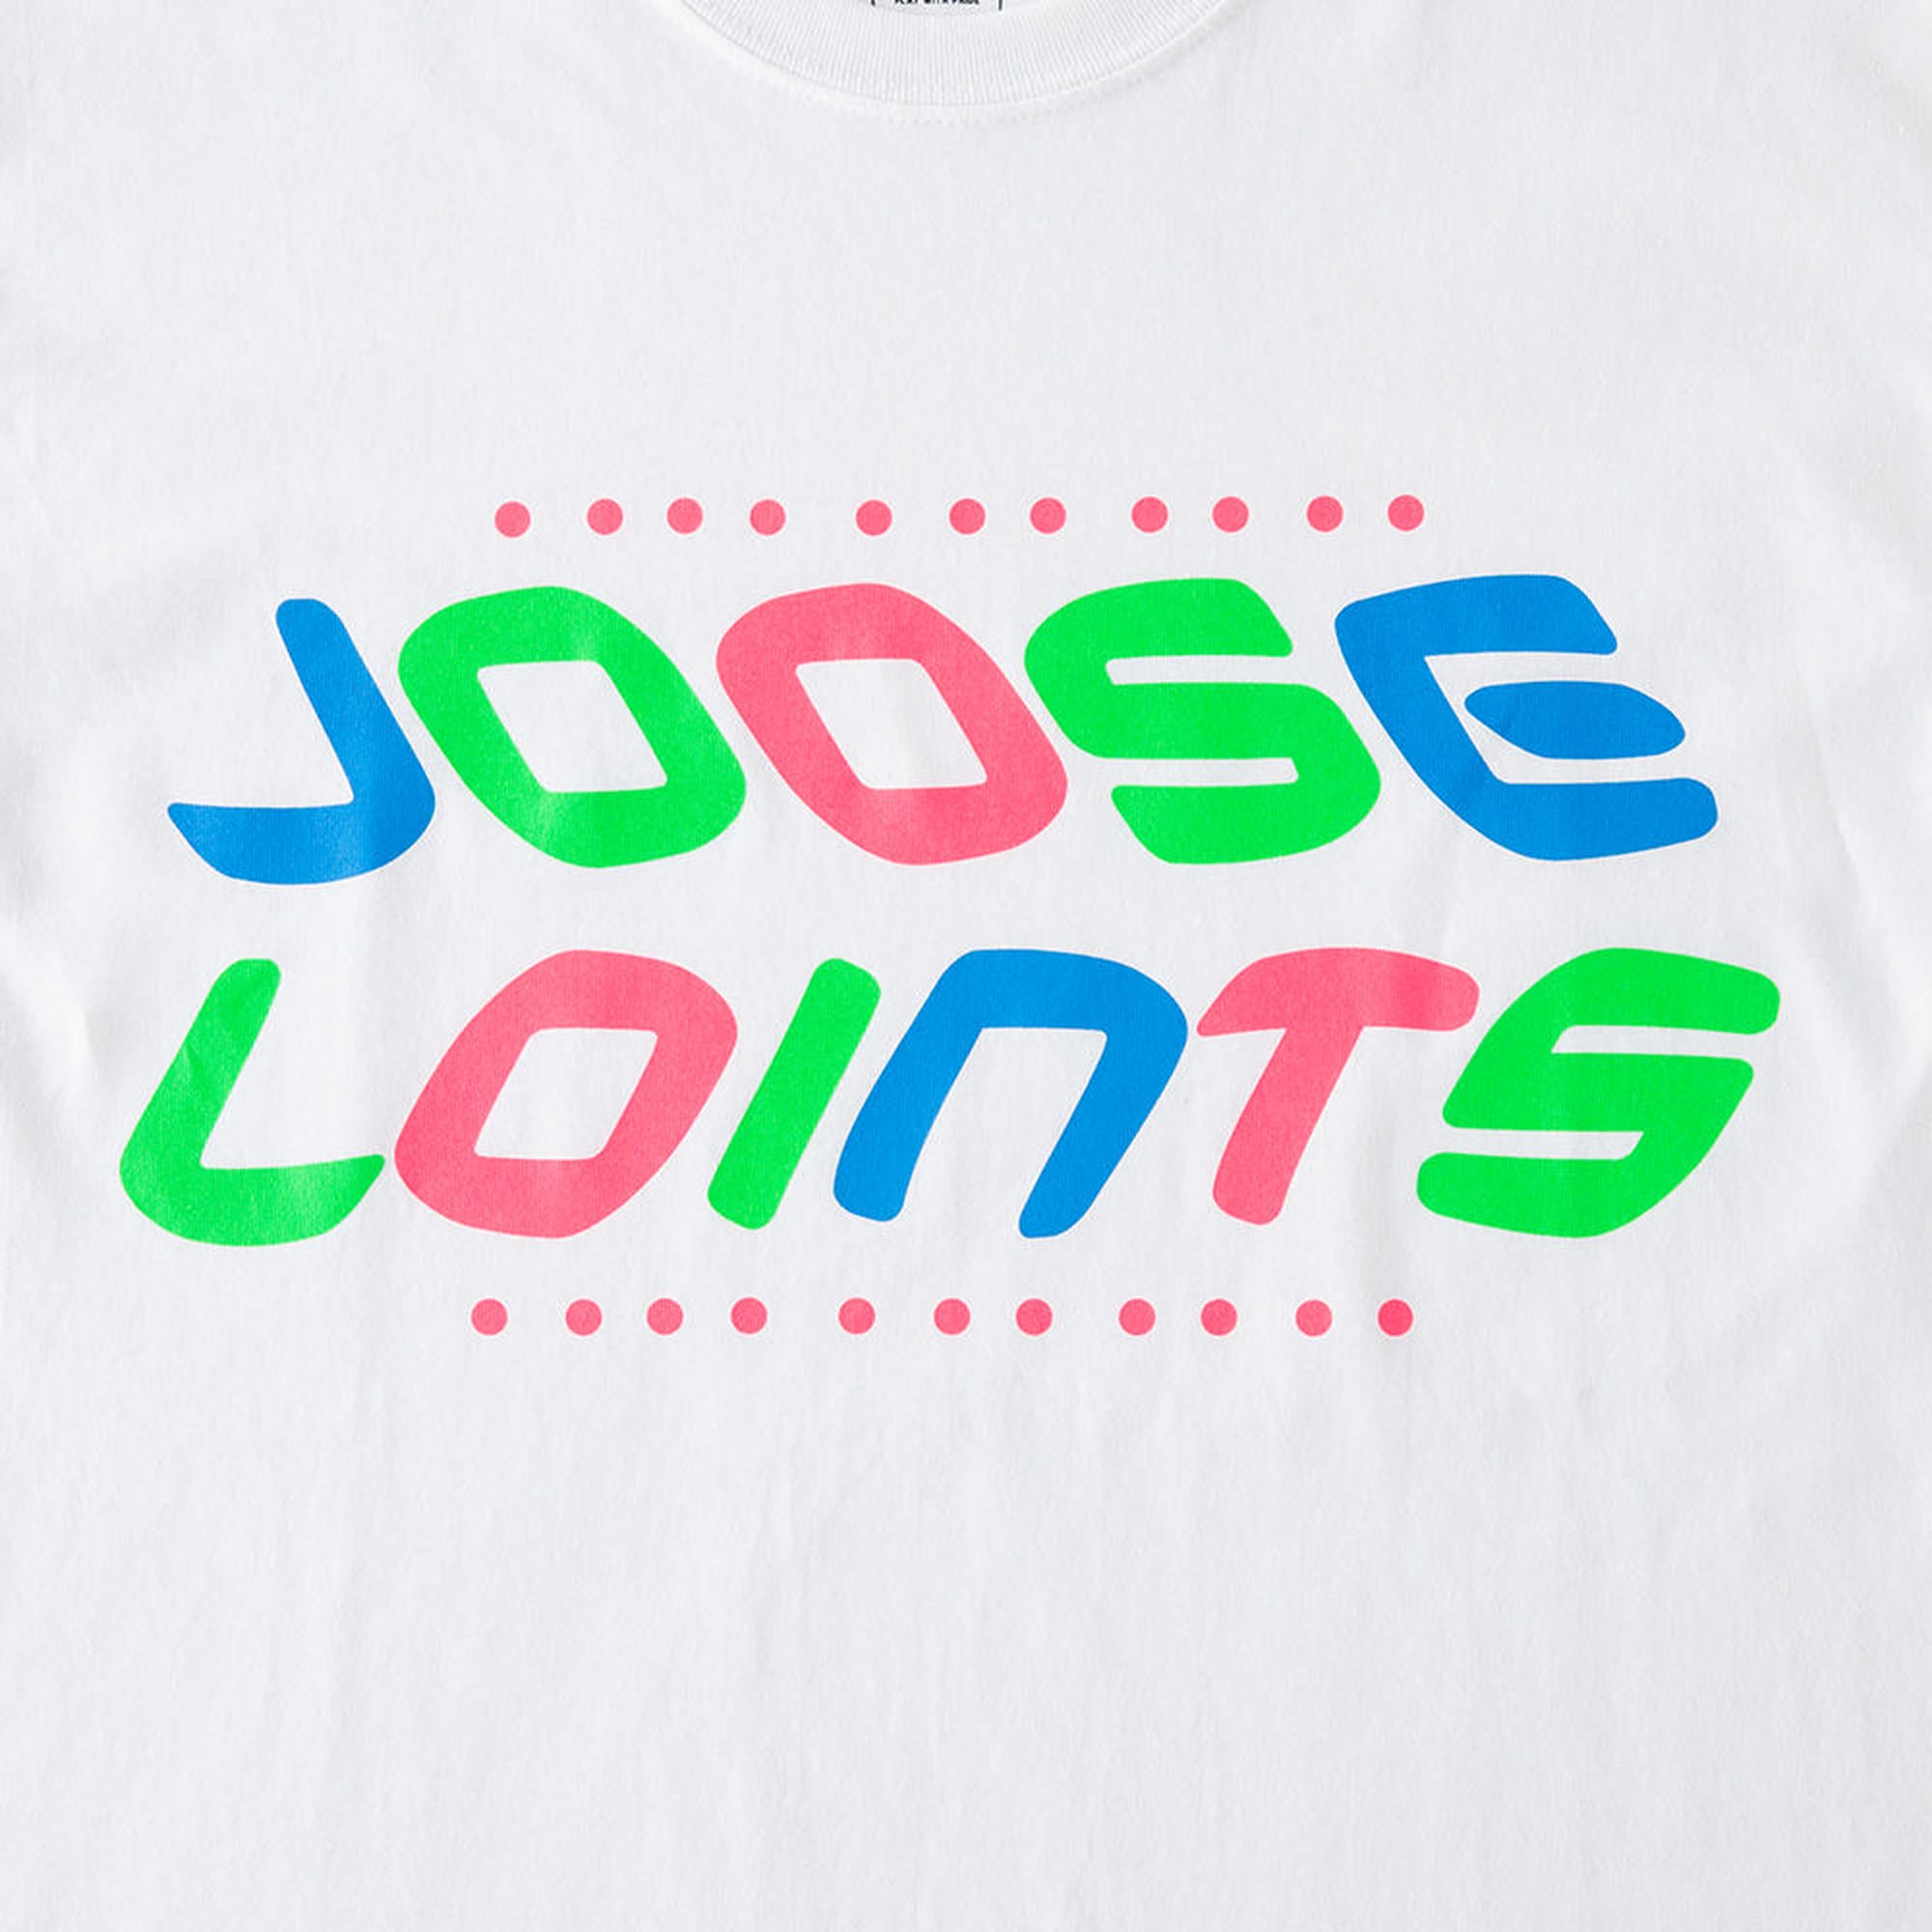 SYCH HACKERS - 'Joose Loints' S/S TEE